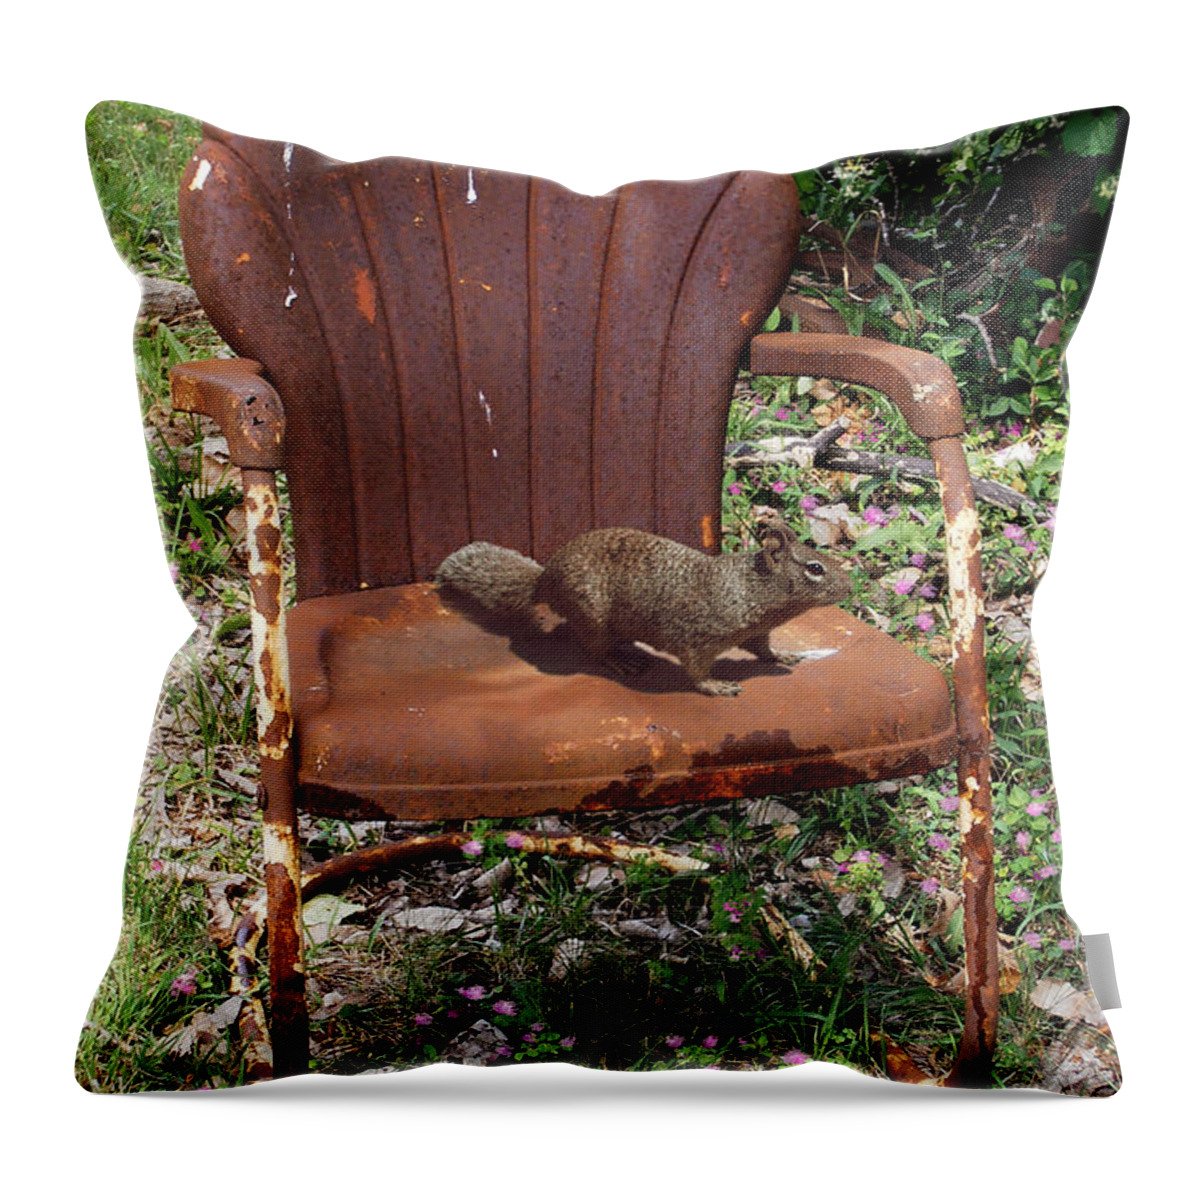 Careful Where You Sit! Throw Pillow featuring the photograph Careful Where You Sit by Doug Kreuger